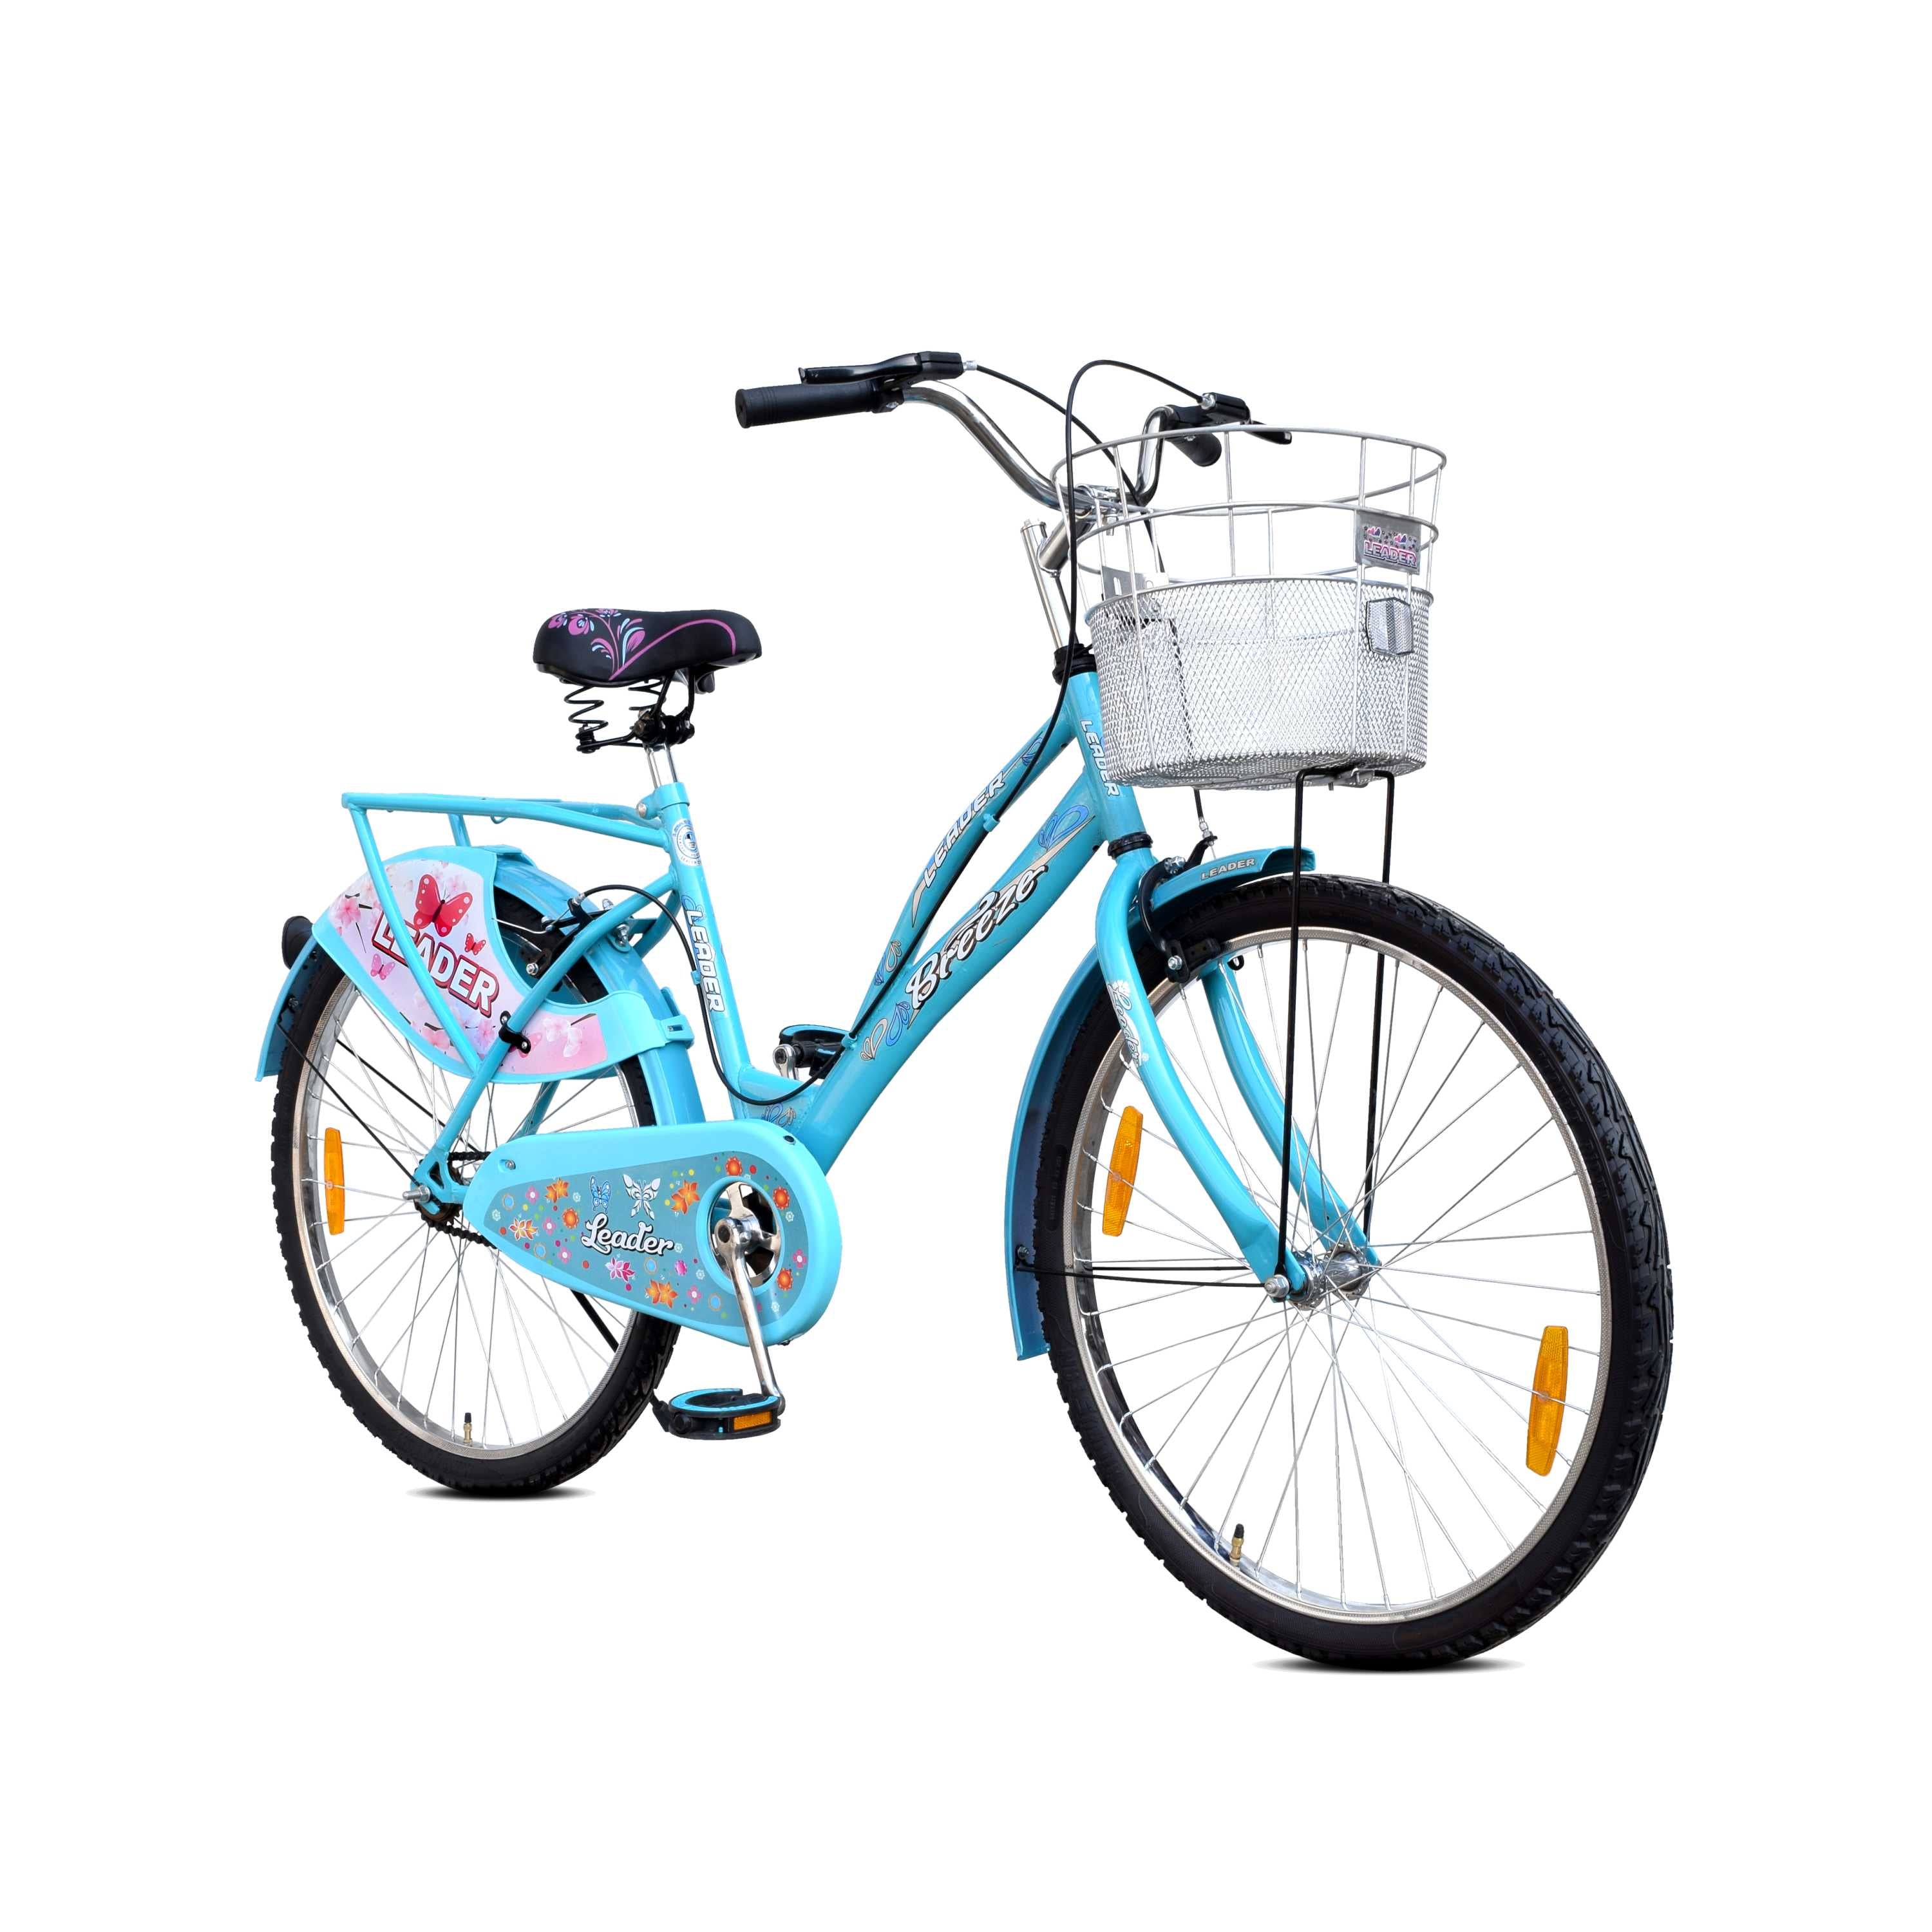 Leader Lady Bird Breeze 26T Bicycle for Girls